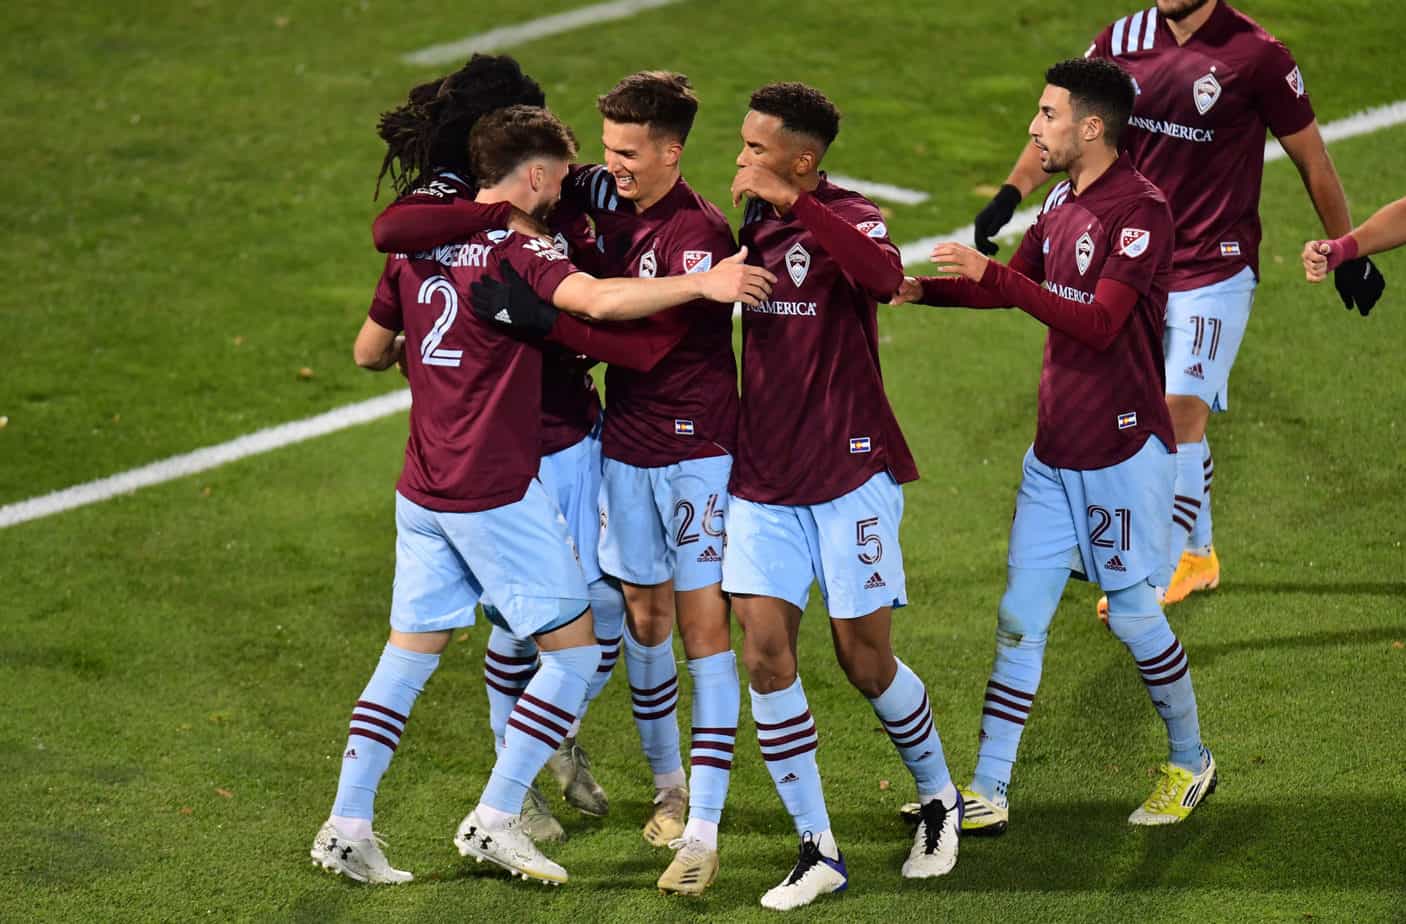 Colorado Rapids look to make a playoff push against SJ Earthquakes in the MLS – Preview